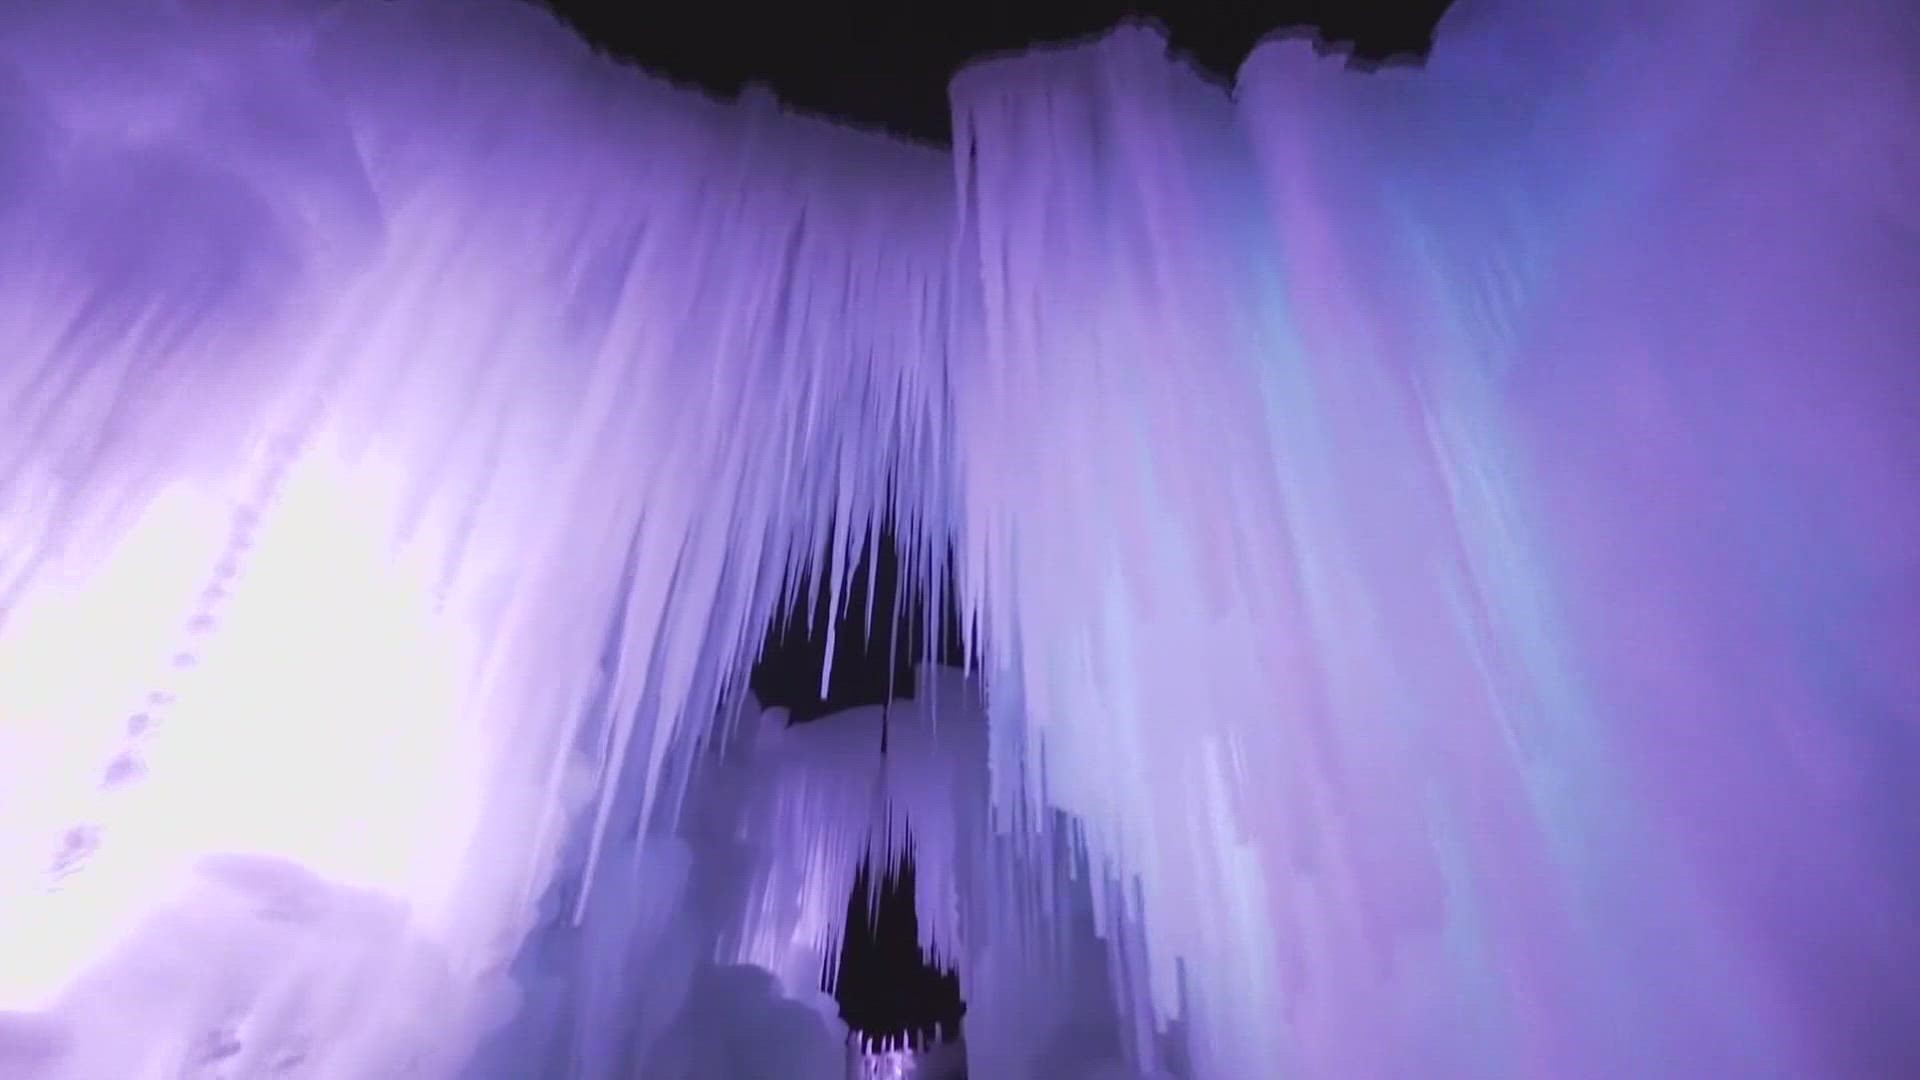 Ice Castles was originally set to open on Jan. 19 this season, but a "warm start to January" led to the date being pushed back.